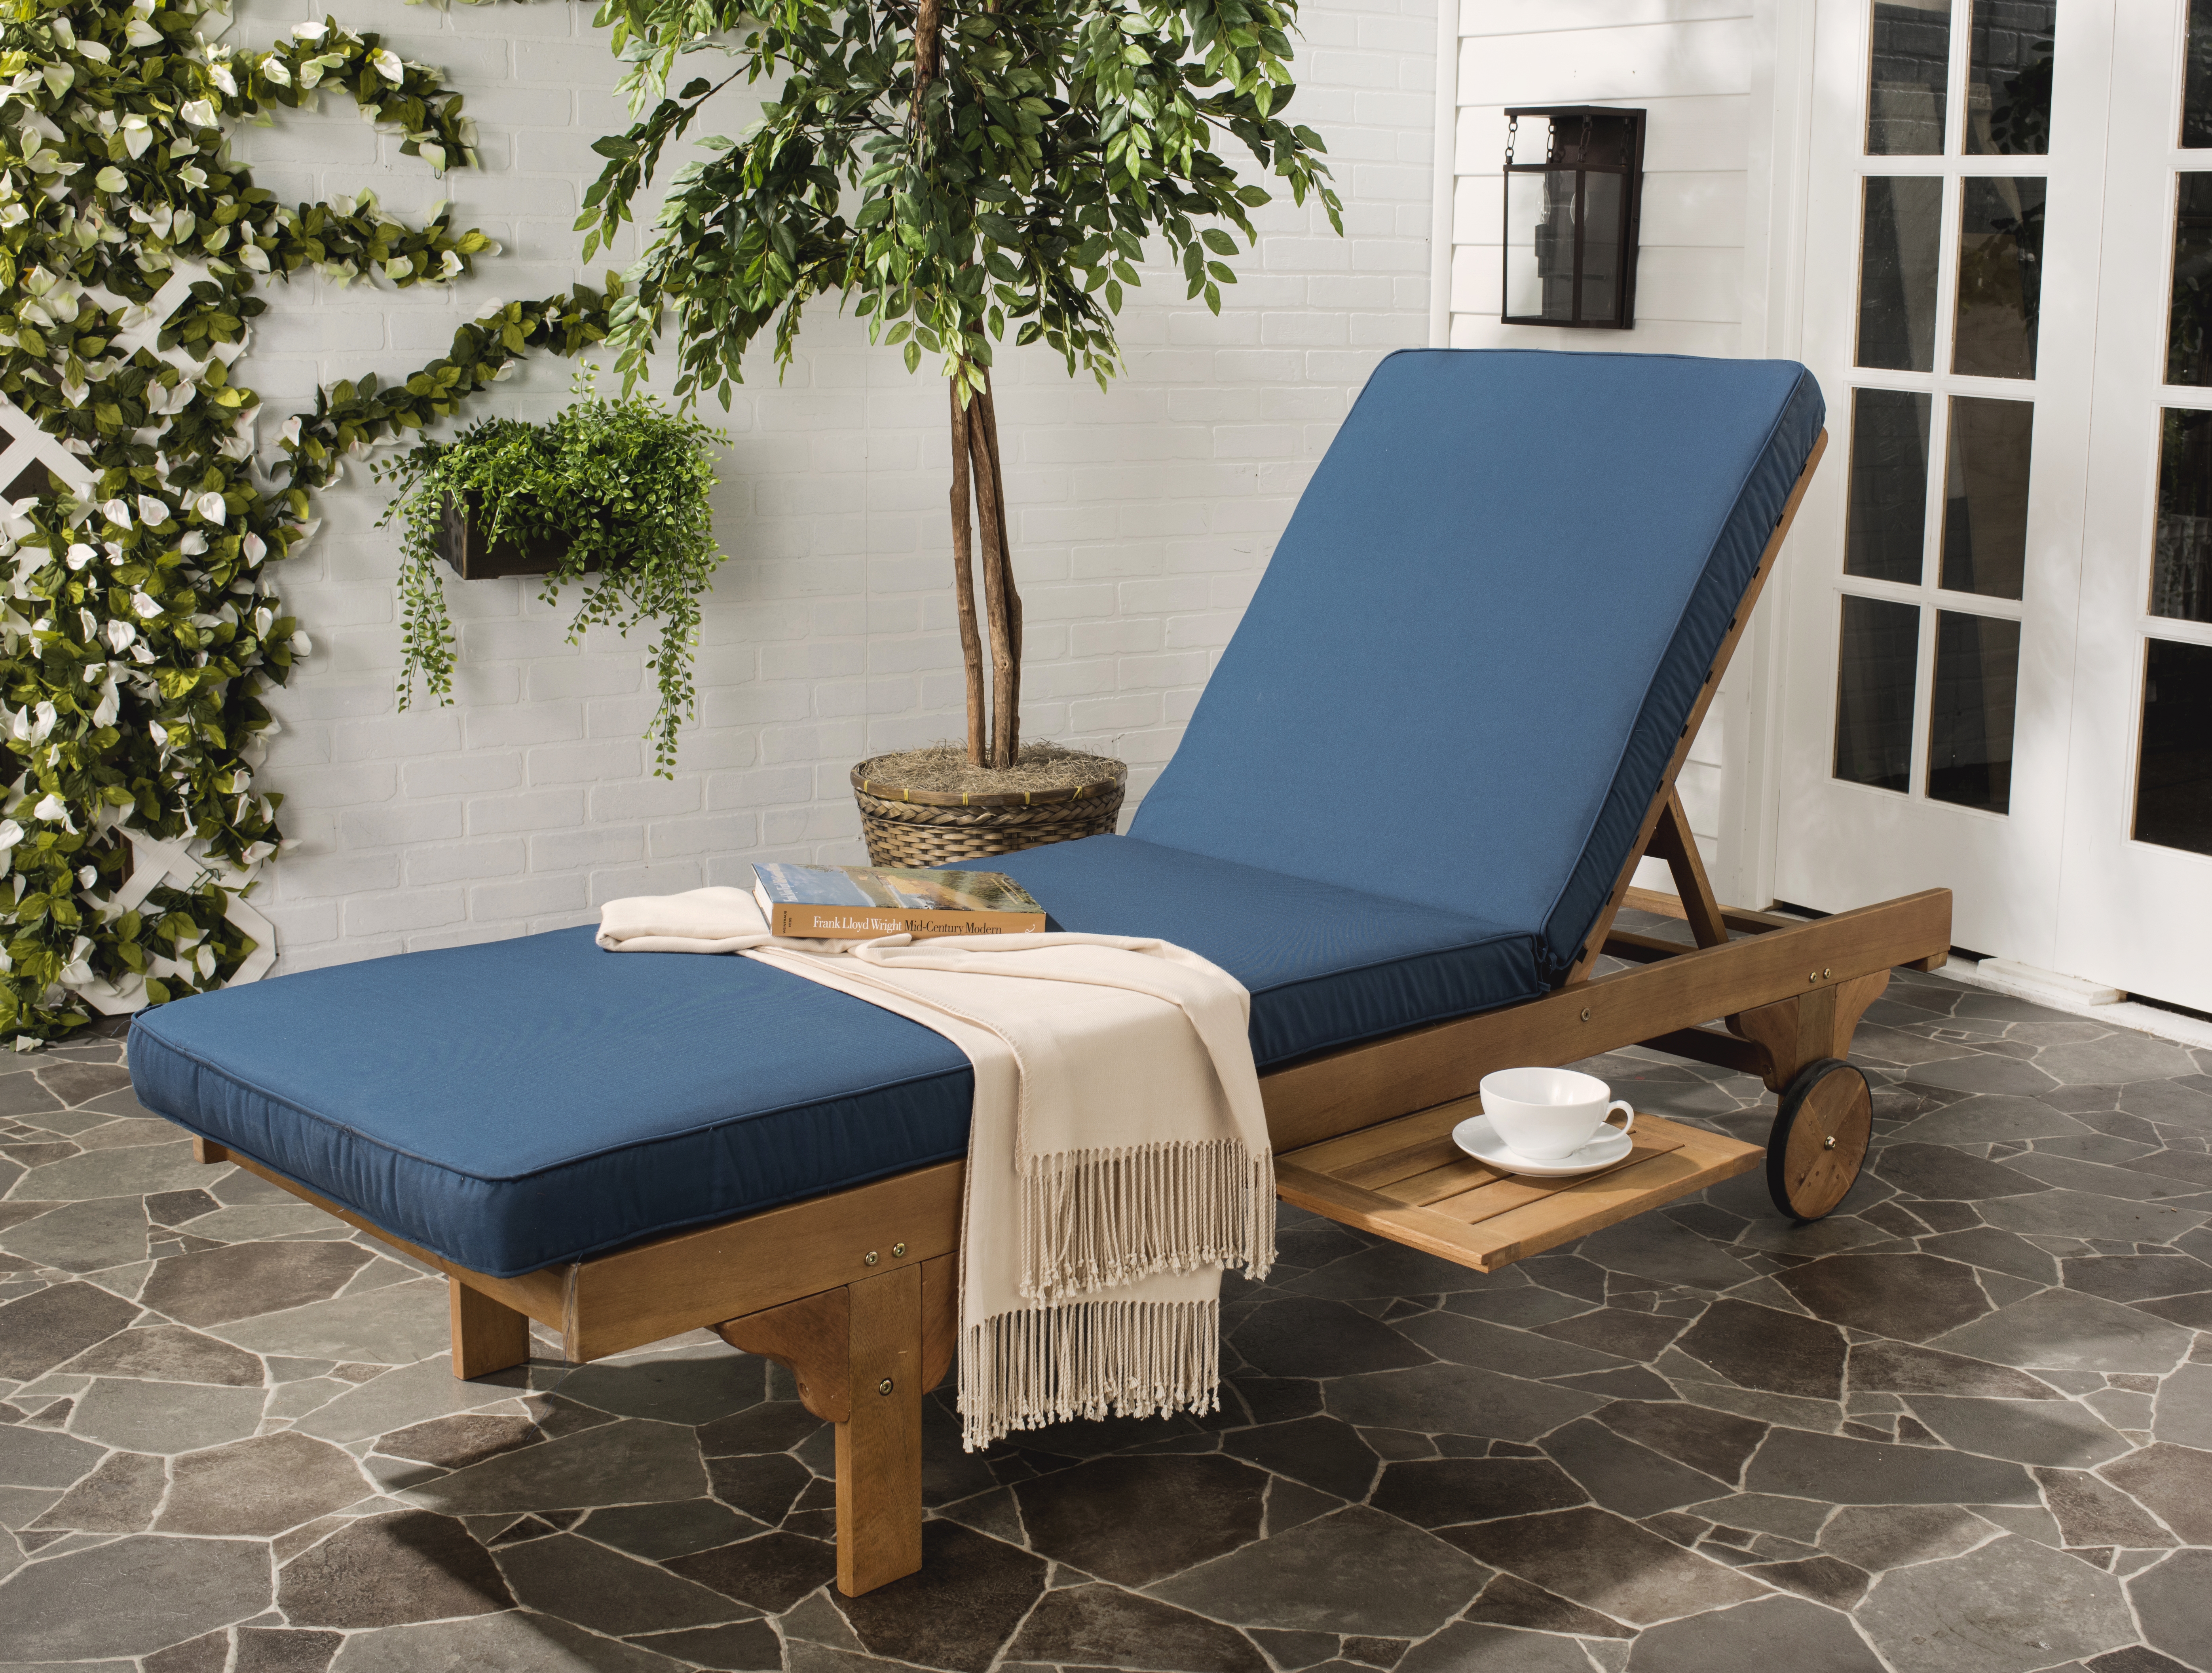 Newport Chaise Lounge Chair With Side Table - Natural/Navy - Safavieh - Image 6